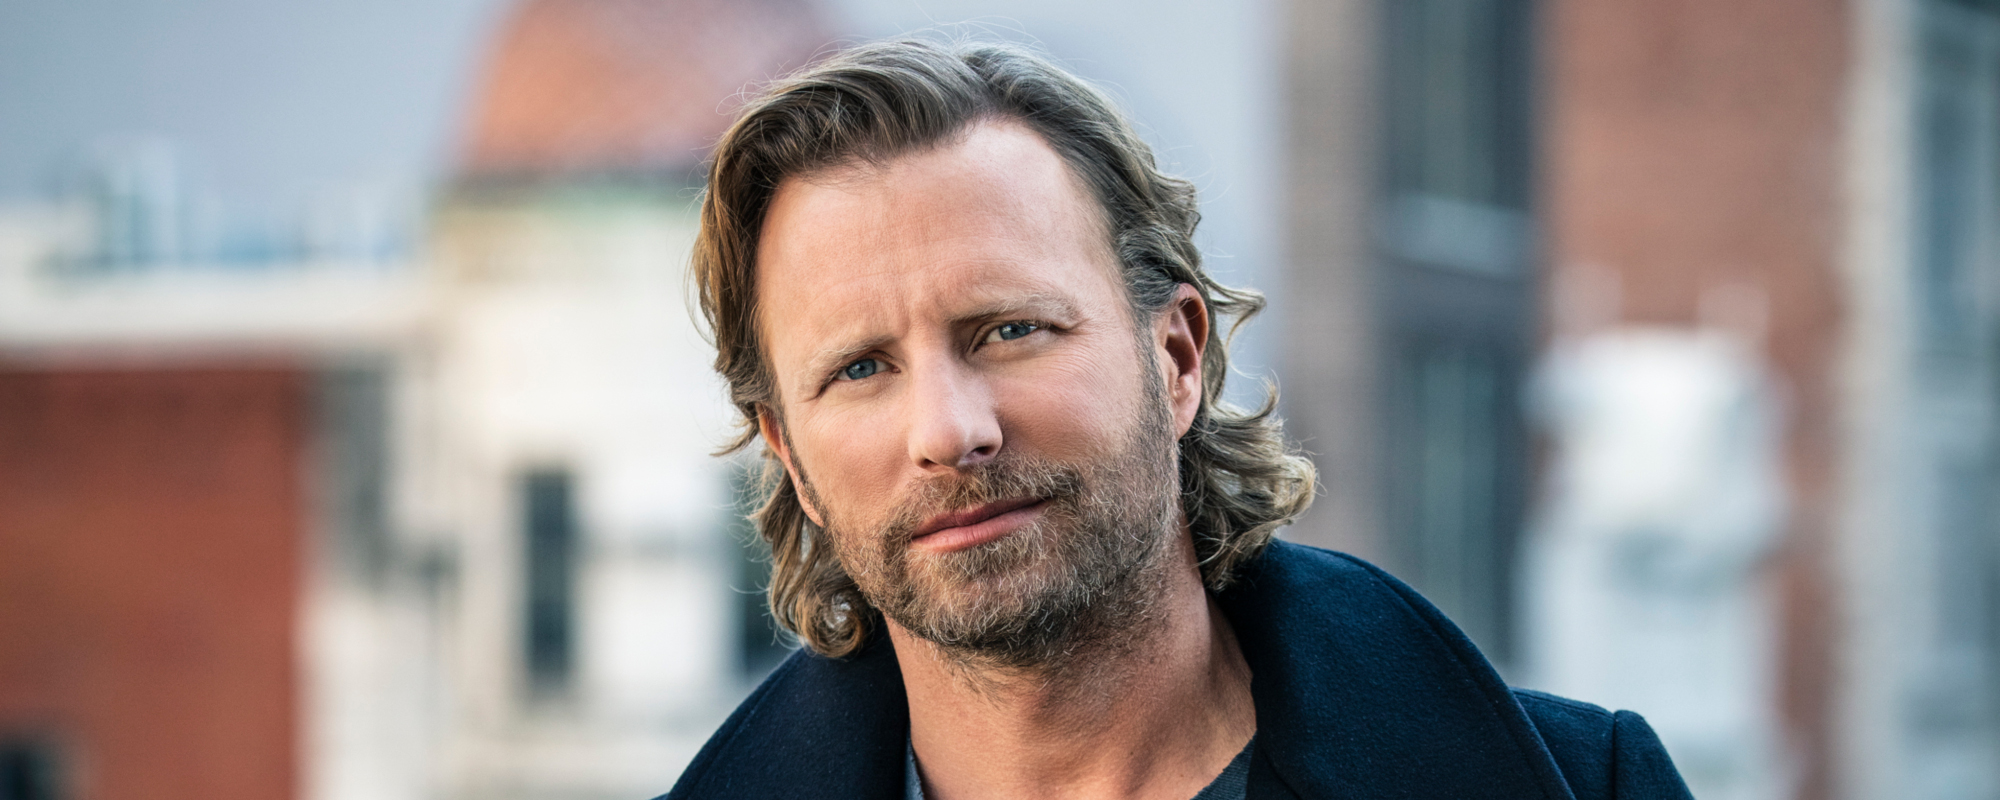 Behind the Song Lyrics: “Somewhere on a Beach” by Dierks Bentley